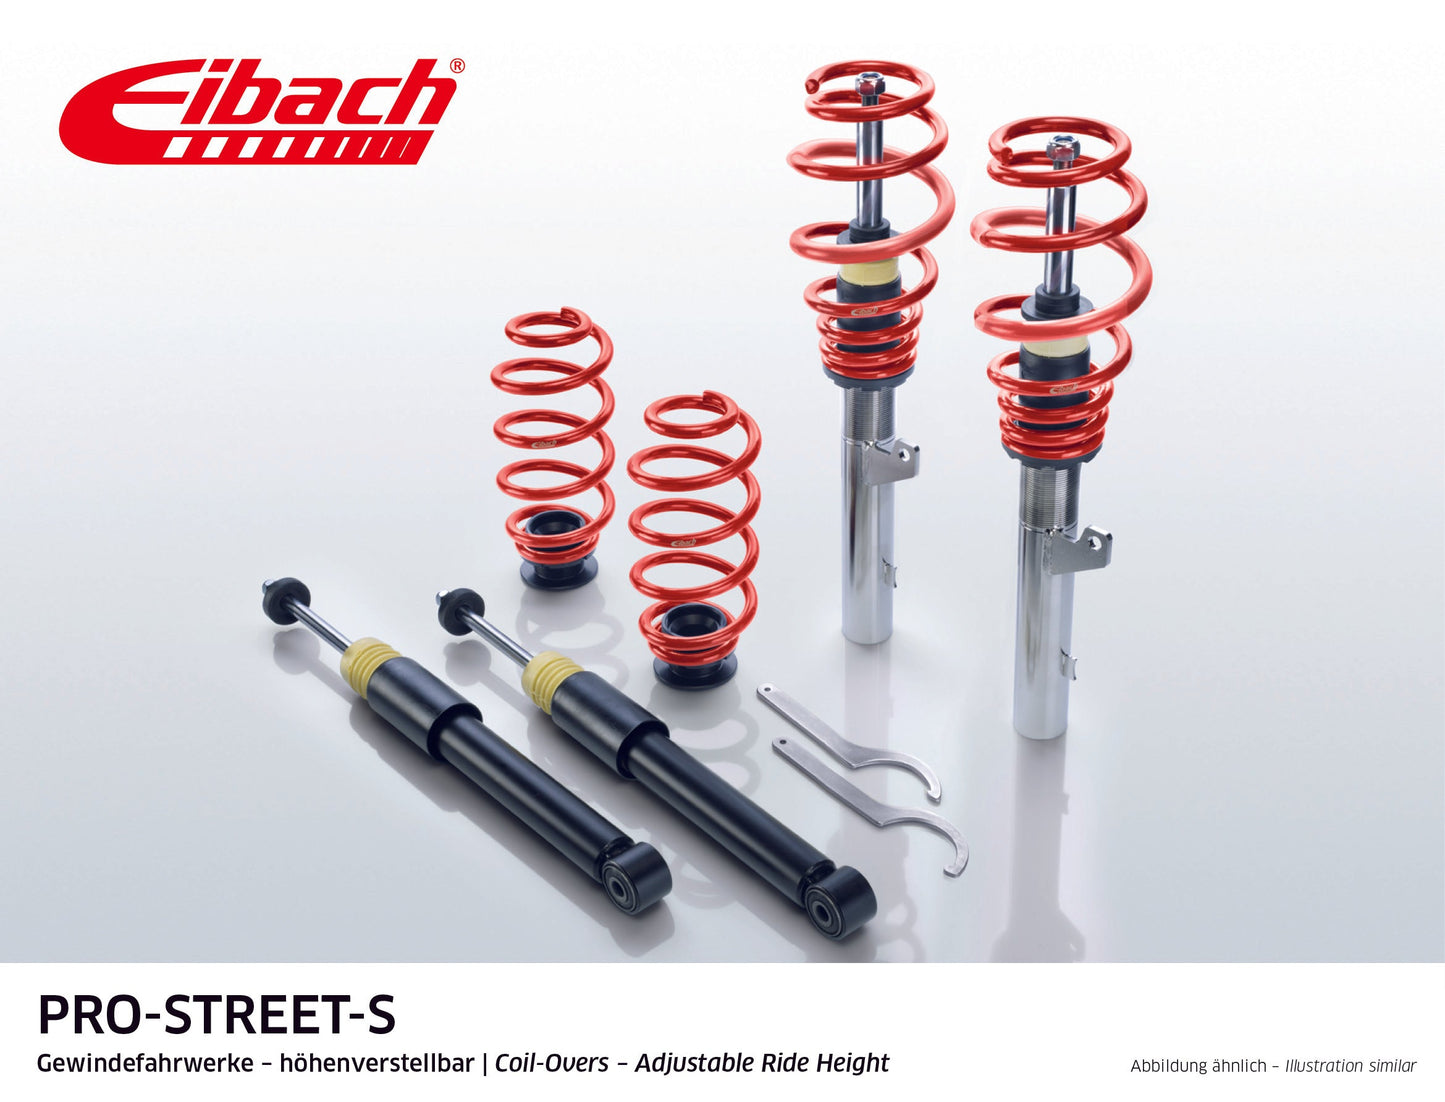 Eibach Pro-Street Coilover (PSS65-15-018-04-22) at £995.69